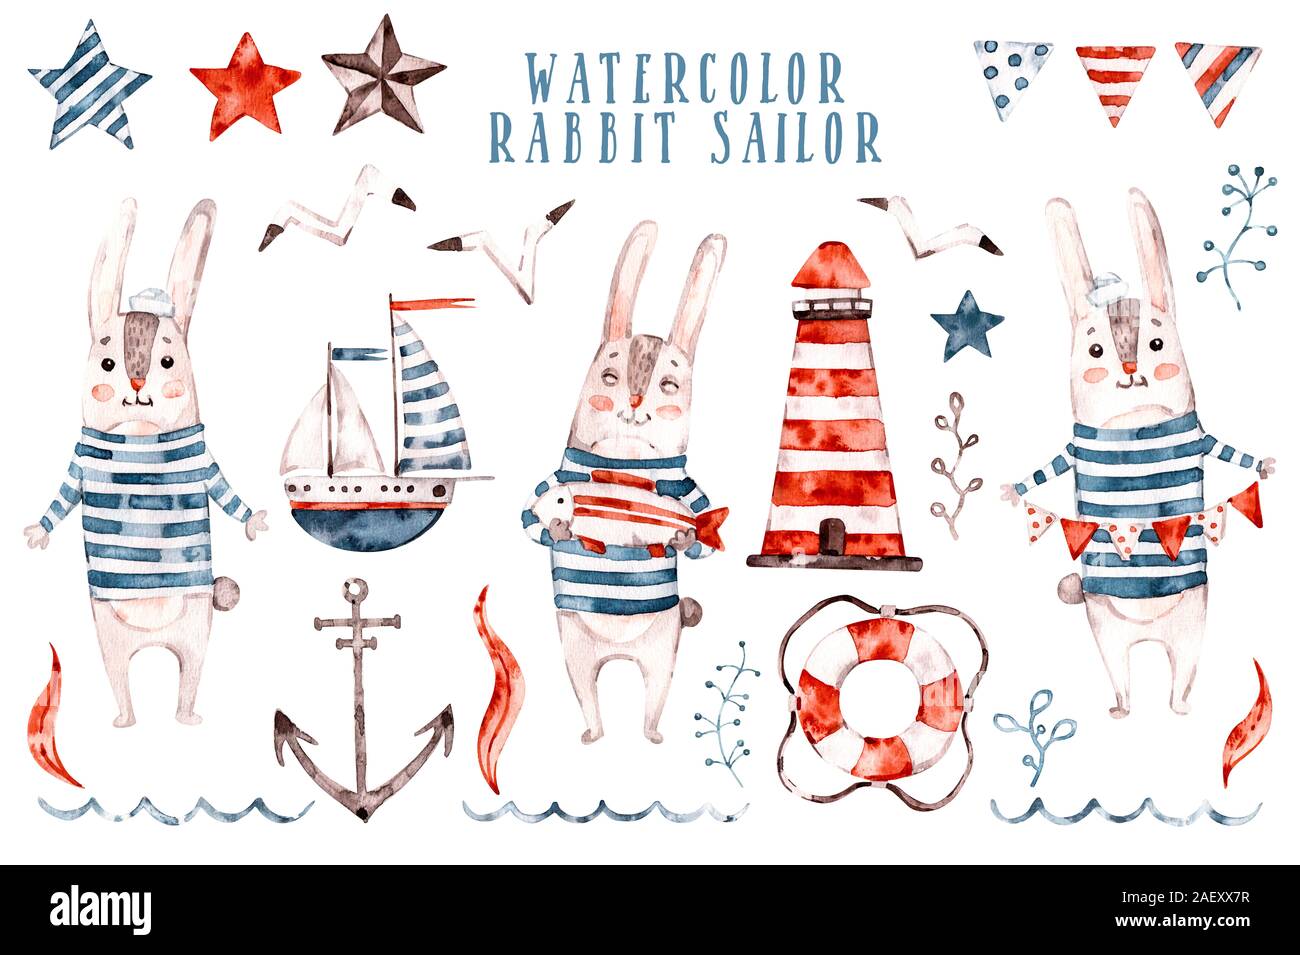 Hand painted watercolor illustration of a cute funny rabbits sailor in striped shirt. Nursery clipart with bunny and sea Isolated objects Stock Photo